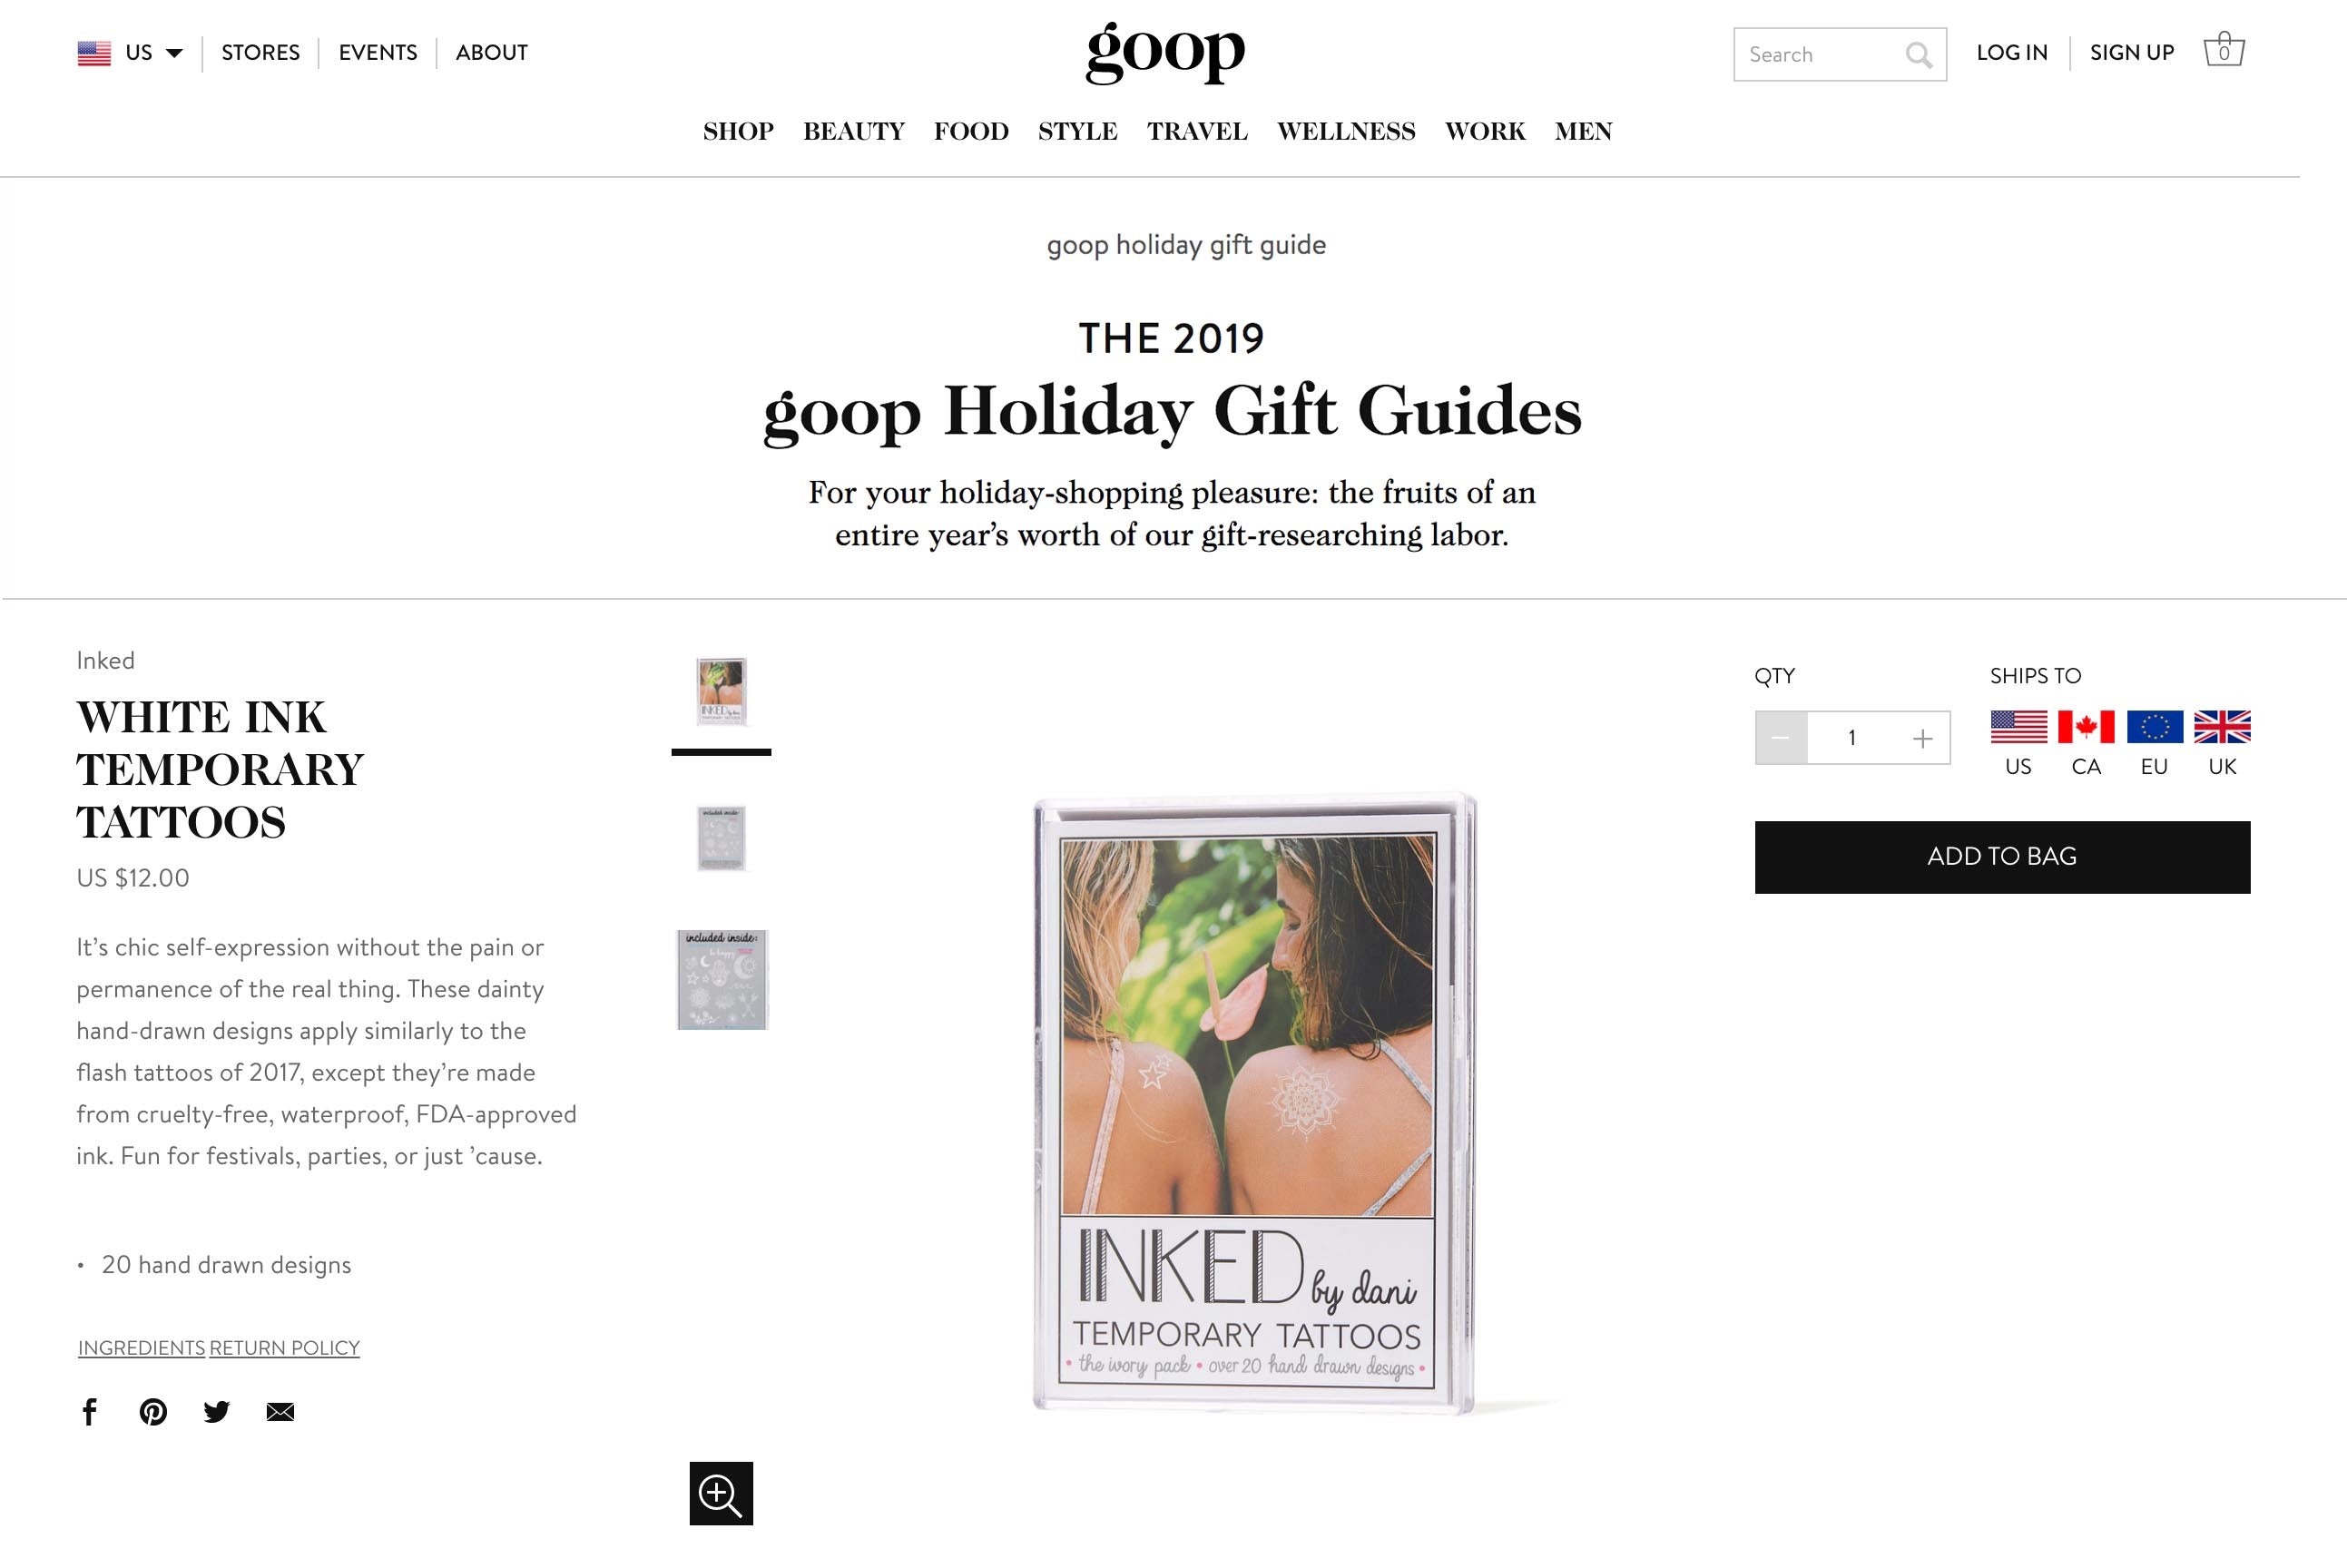 GOOP 2019 HOLIDAY GIFT GUIDE